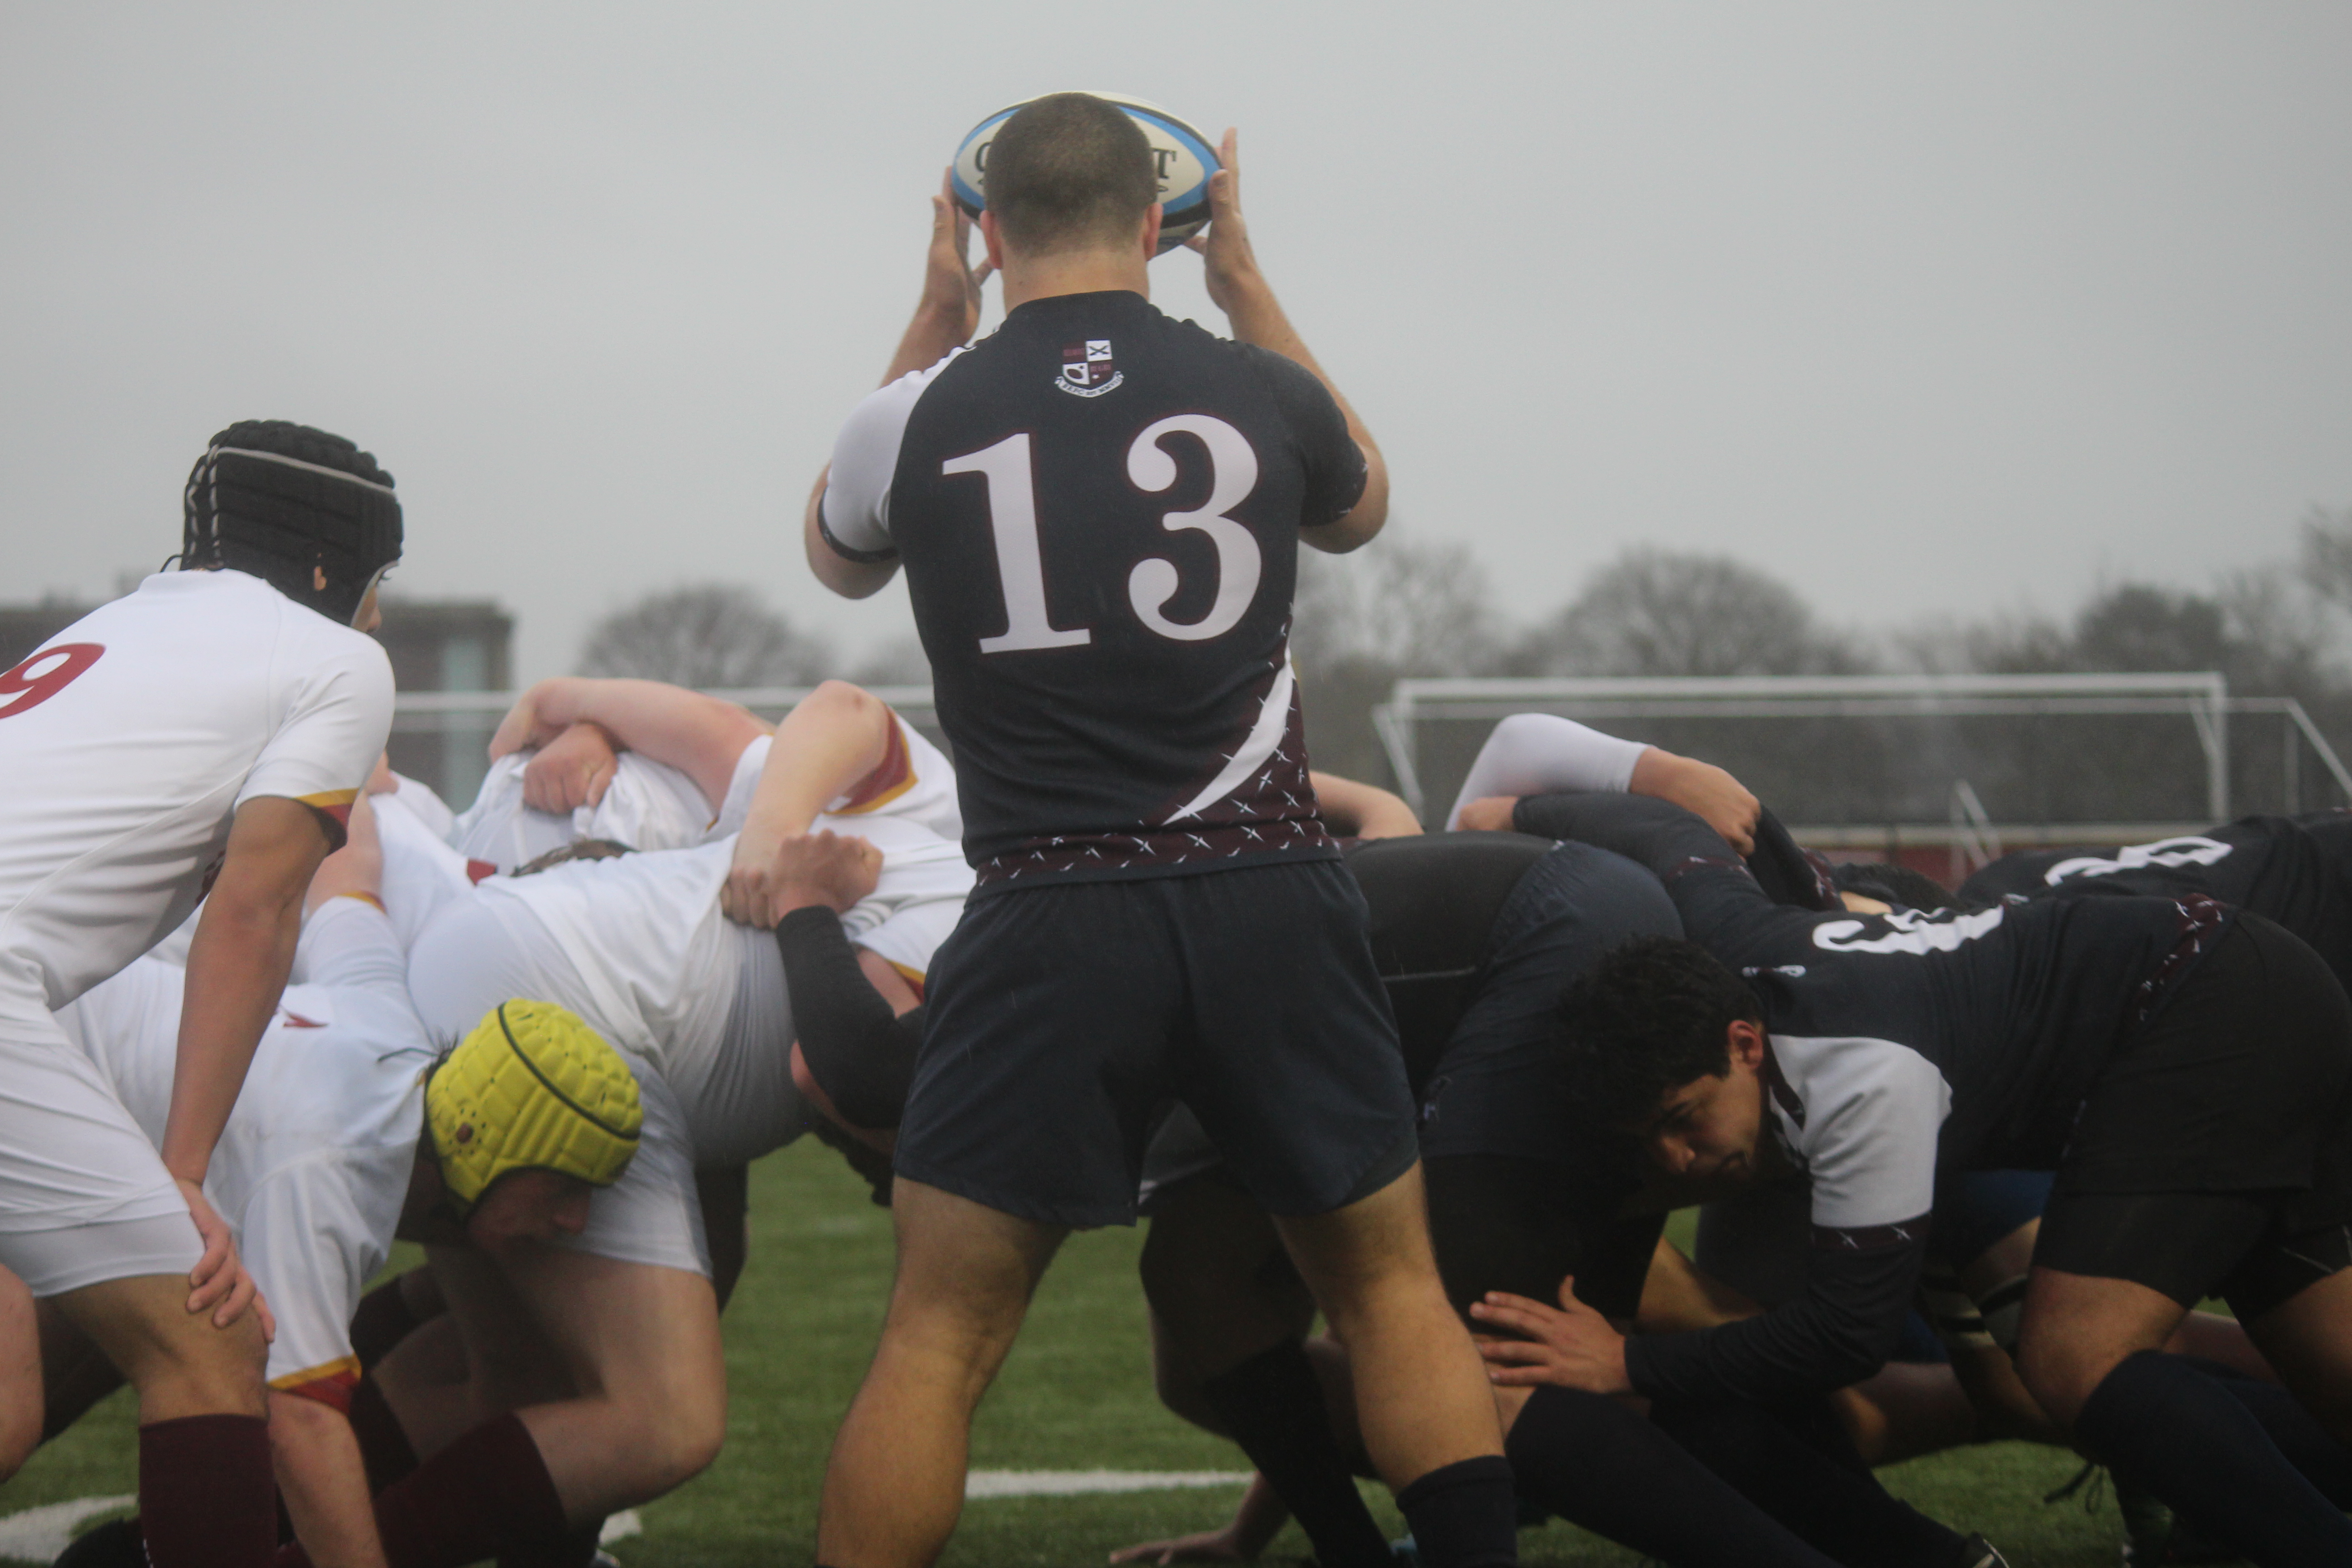 Belmont boys rugby wins state championship by besting BC High, 20-7, at  Curry College